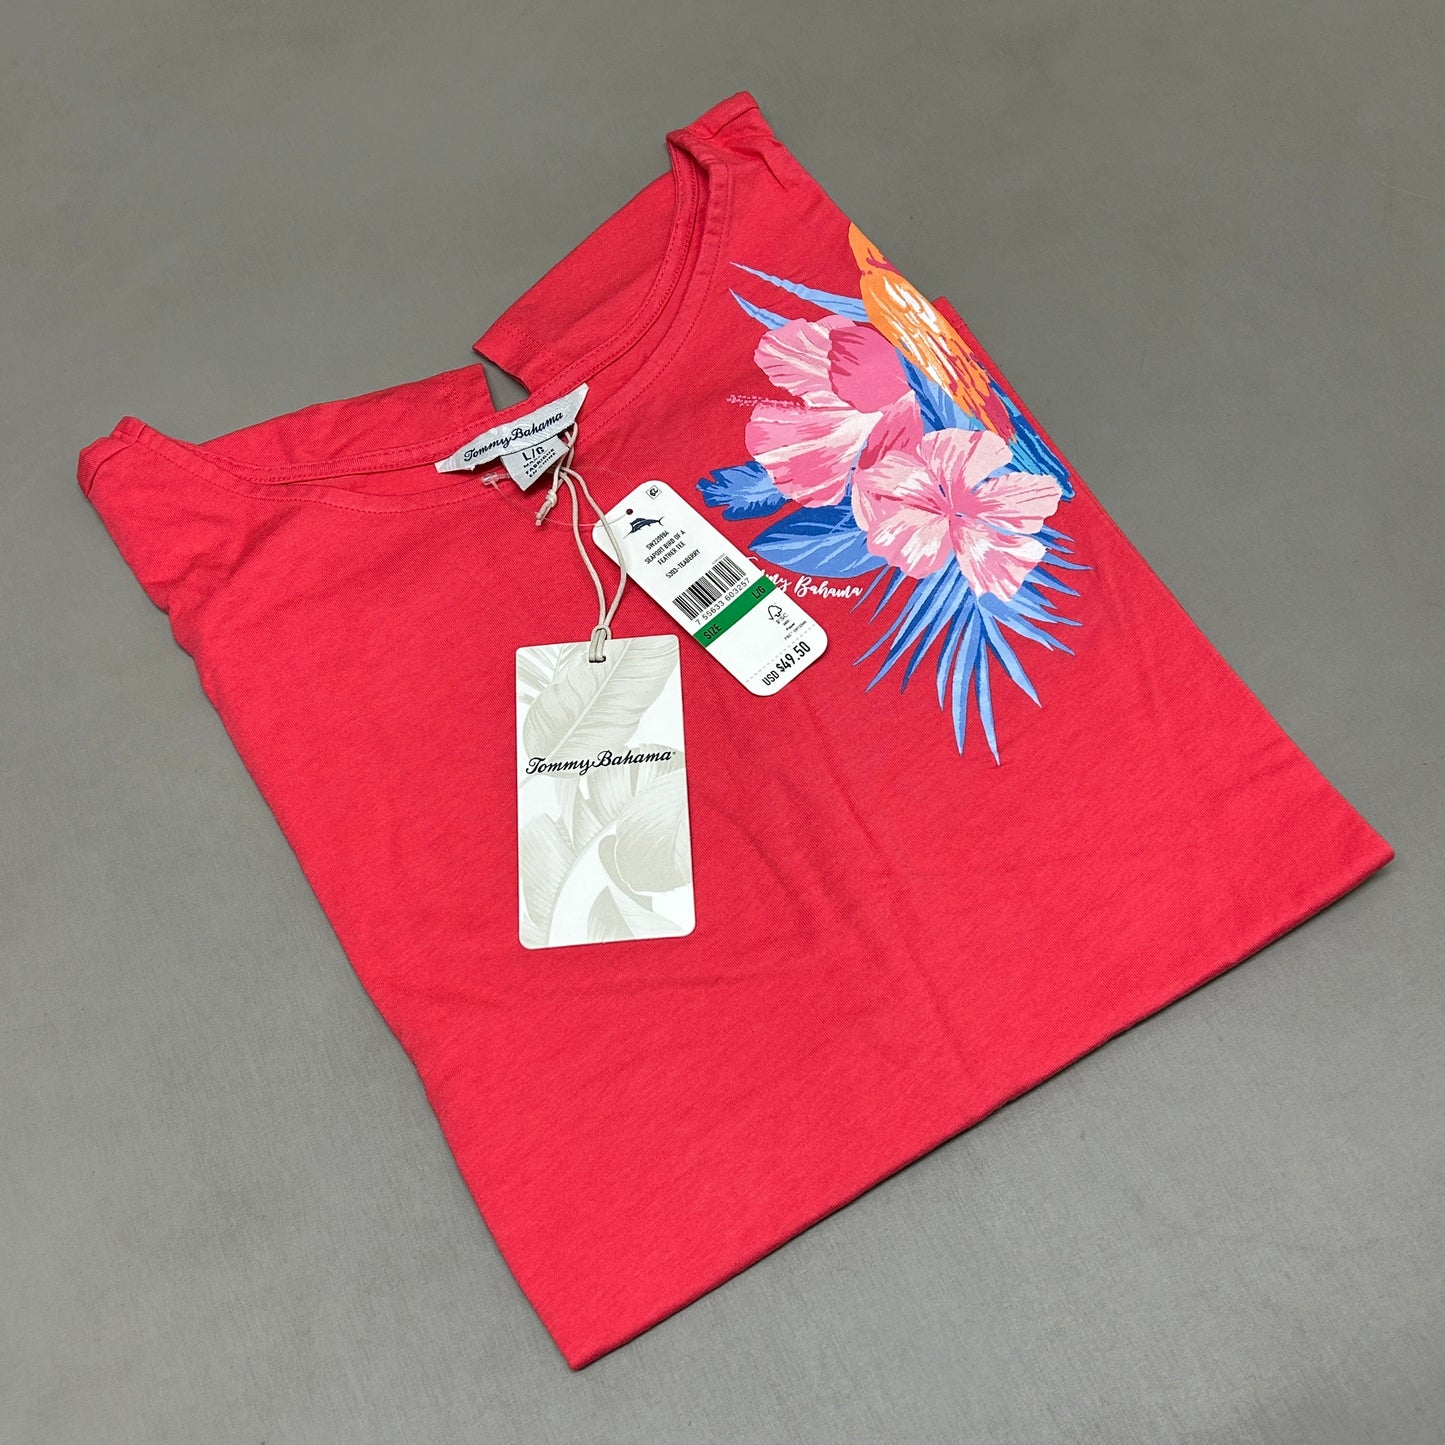 TOMMY BAHAMA Women's Seaport Bird of a Feather Tee Shirt TeaBerry Size L(New)